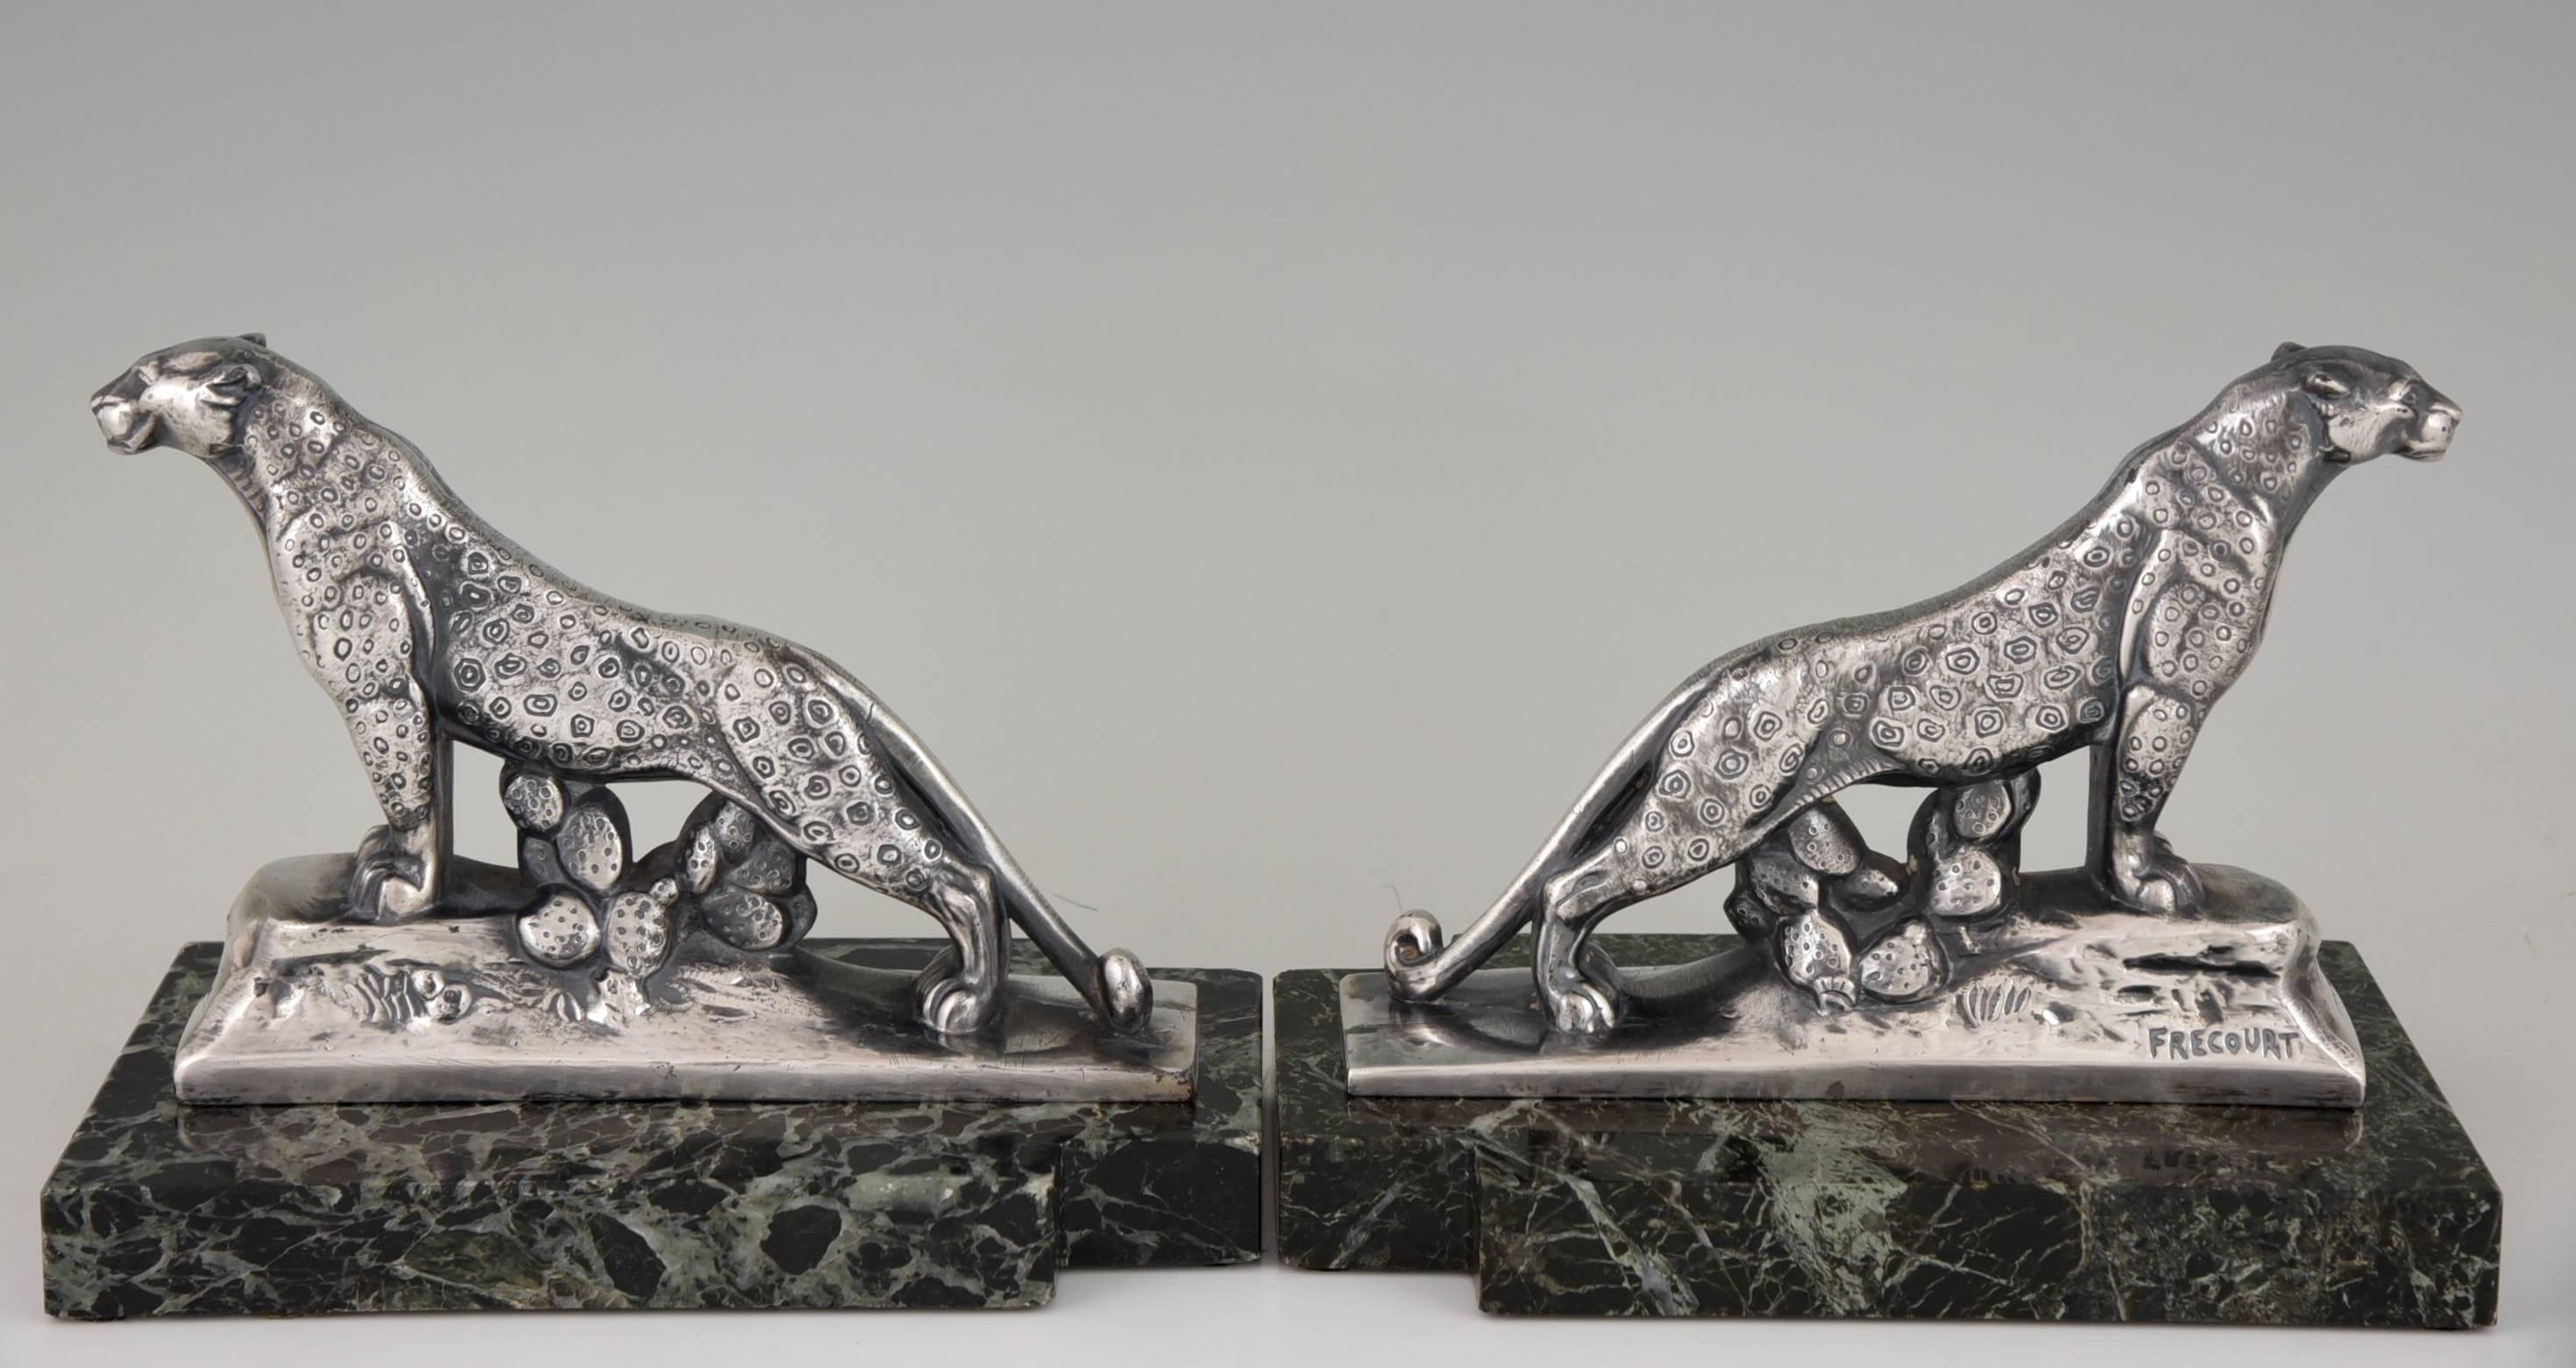 Description:  A pair of Art Deco panther bookends.
Artist/ Maker: Maurice Frecourt.
Signature/ Marks: Frecourt.
Style:  Art Deco. 
Date:  circa 1930. 
Material:  Metal with silver patina. On green marble bases. 
Origin:  France. 
Size:  
H